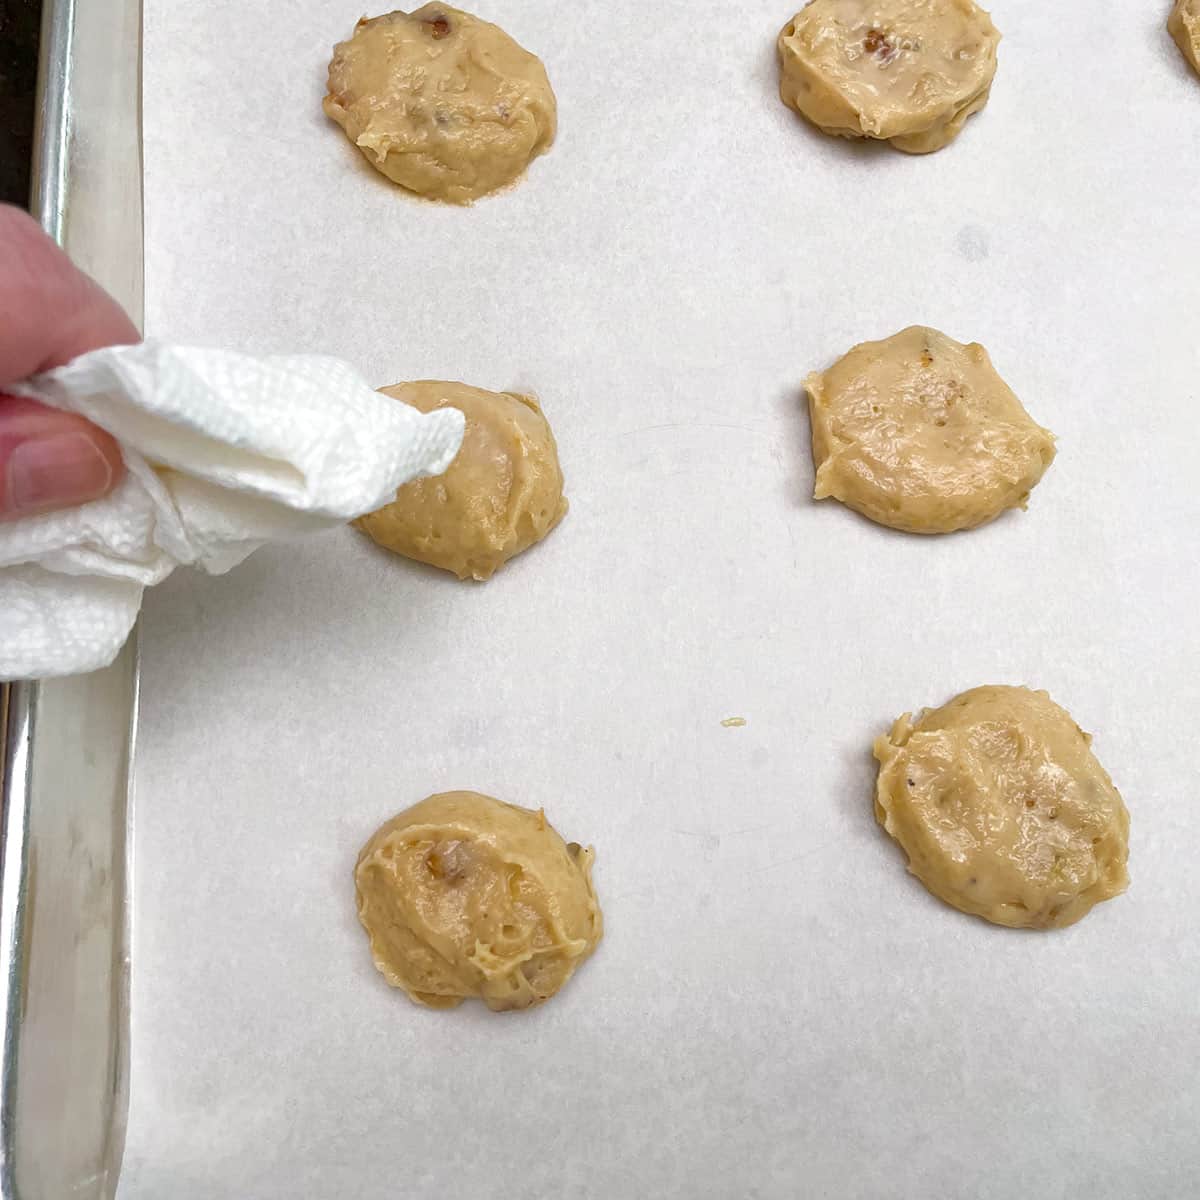 Dabbing the tops of the cookie mounds with a paper towel.